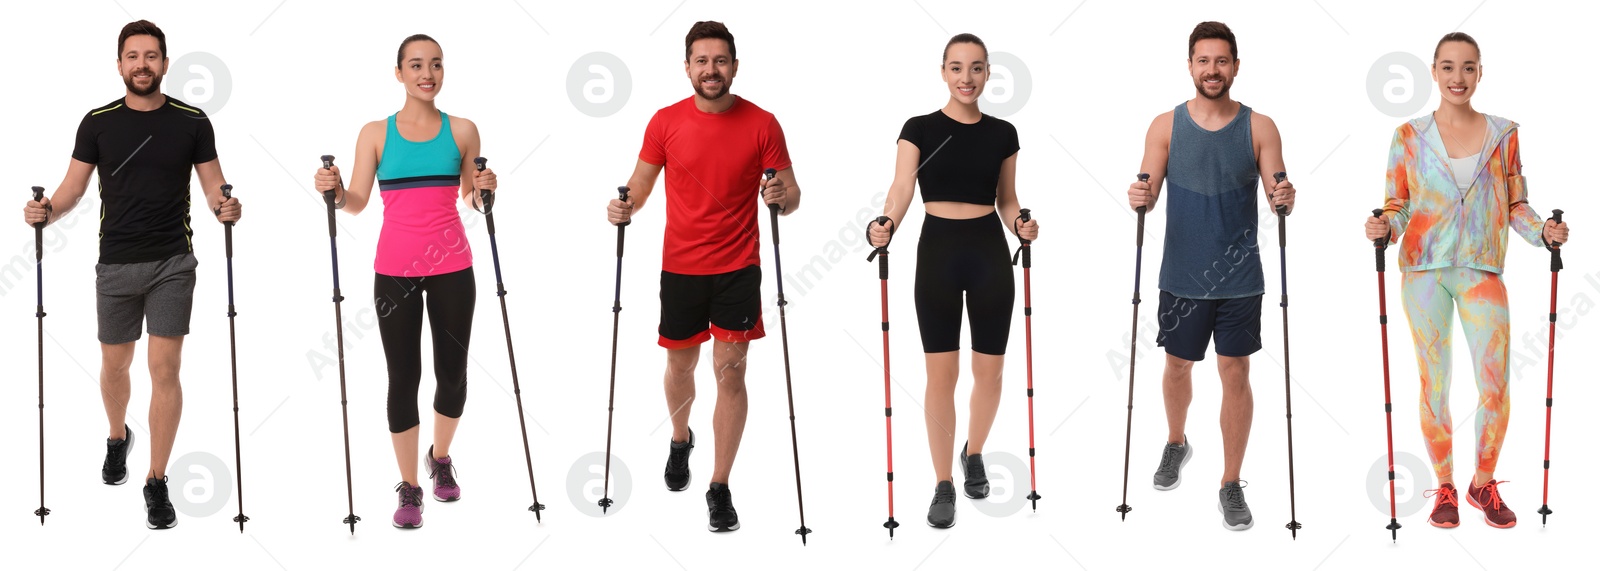 Image of Sporty man and woman with Nordic walking poles on white background, collage with photos